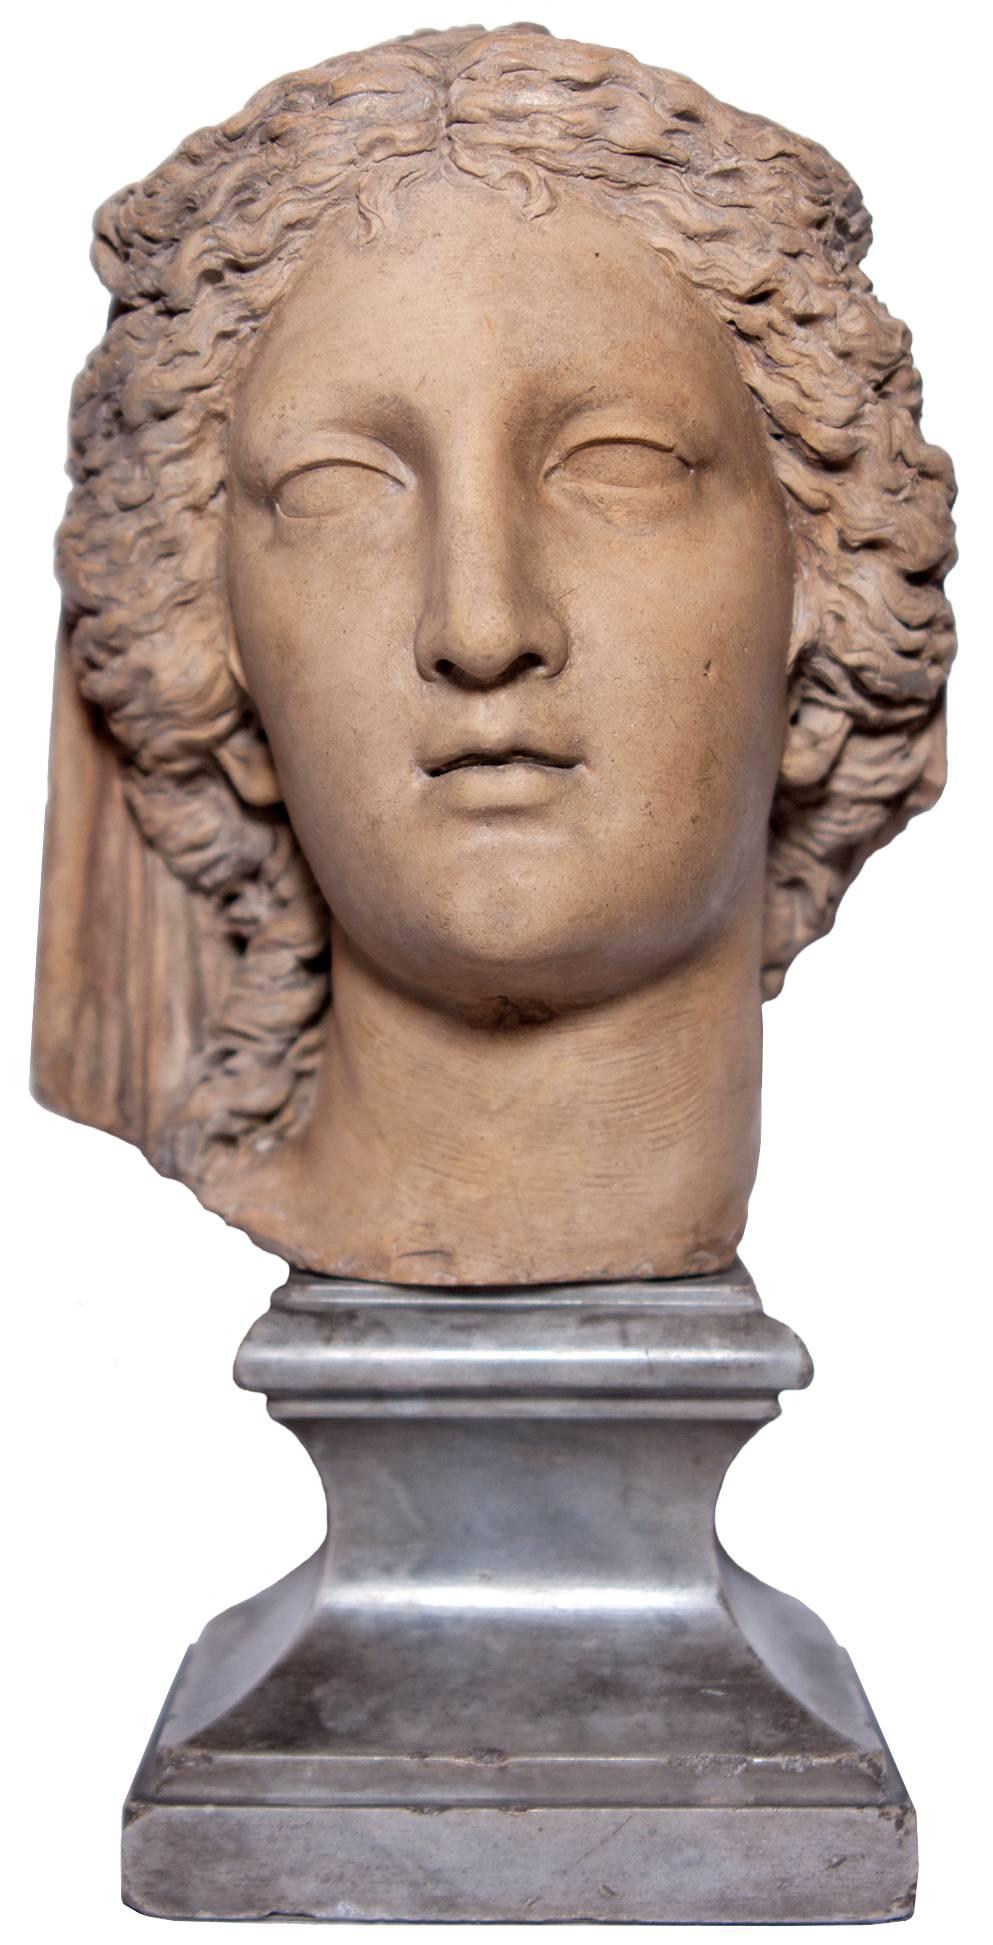 This fine young woman's head in the neoclassical taste is probably a vestal, probably from a bust. It belongs in the artistic movement of the years 1780-1810, as expressed by its hieratic character, deliberately distant from the joyous and gallant